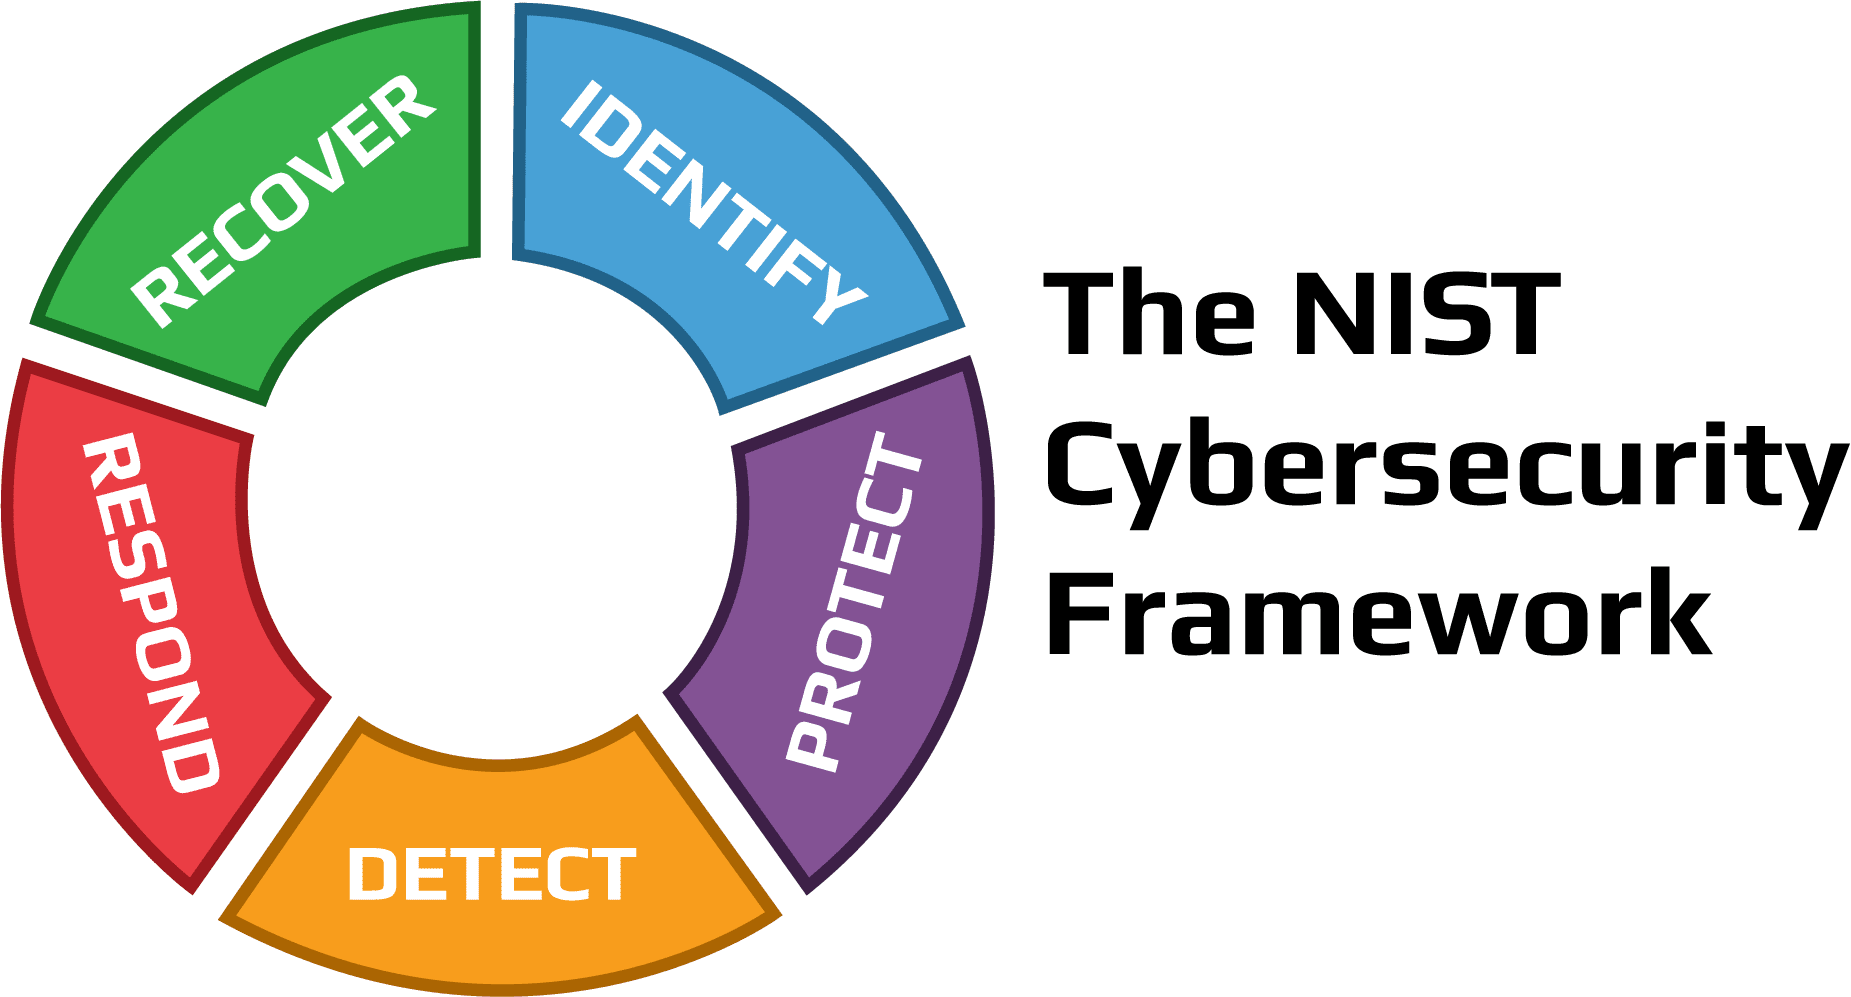 An Overview of the NIST Cybersecurity Framework